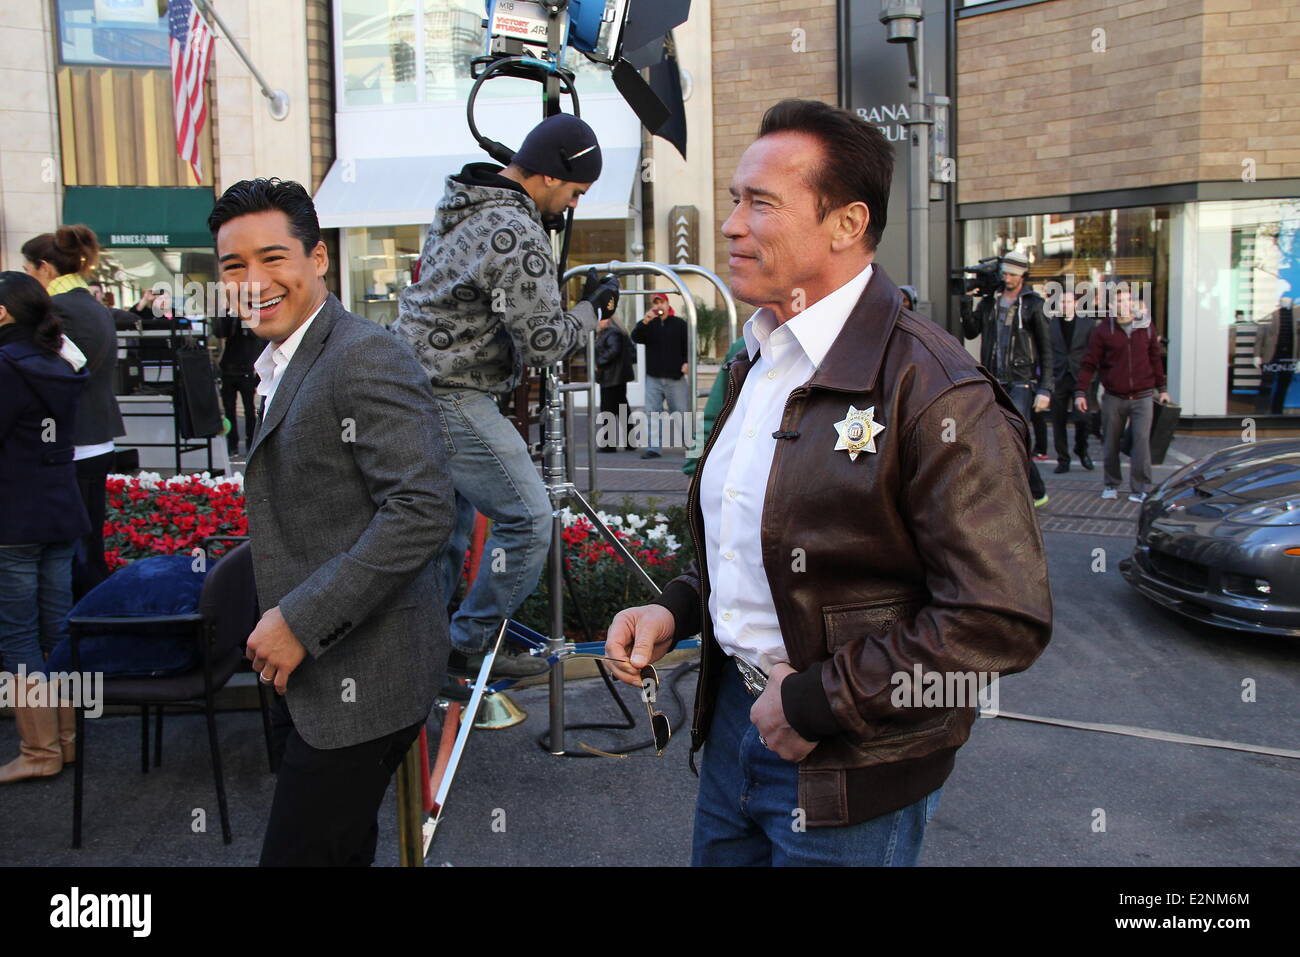 Arnold Schwarzenegger drives a Sheriff truck to The Grove to promote his new film 'The Last Stand' on entertainment news show 'Extra'  Featuring: Arnold Schwarzenegger,Mario Lopez Where: Los Angeles, California, United States When: 14 Jan 2013vid Durocher/WENN.com Stock Photo